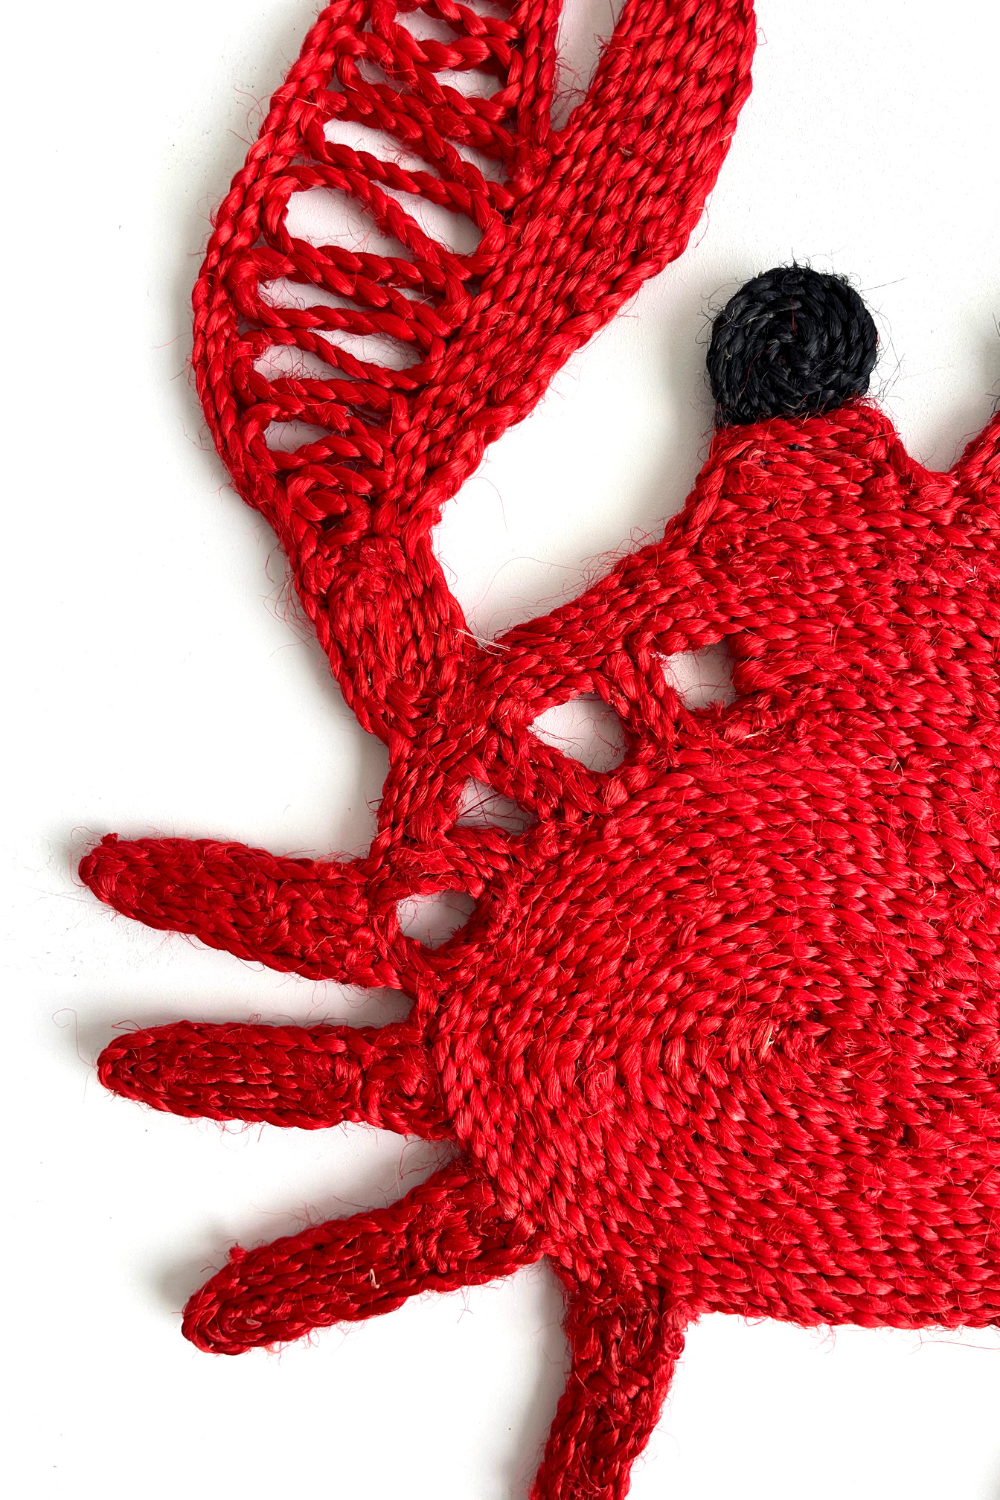 Crab placemat - Red